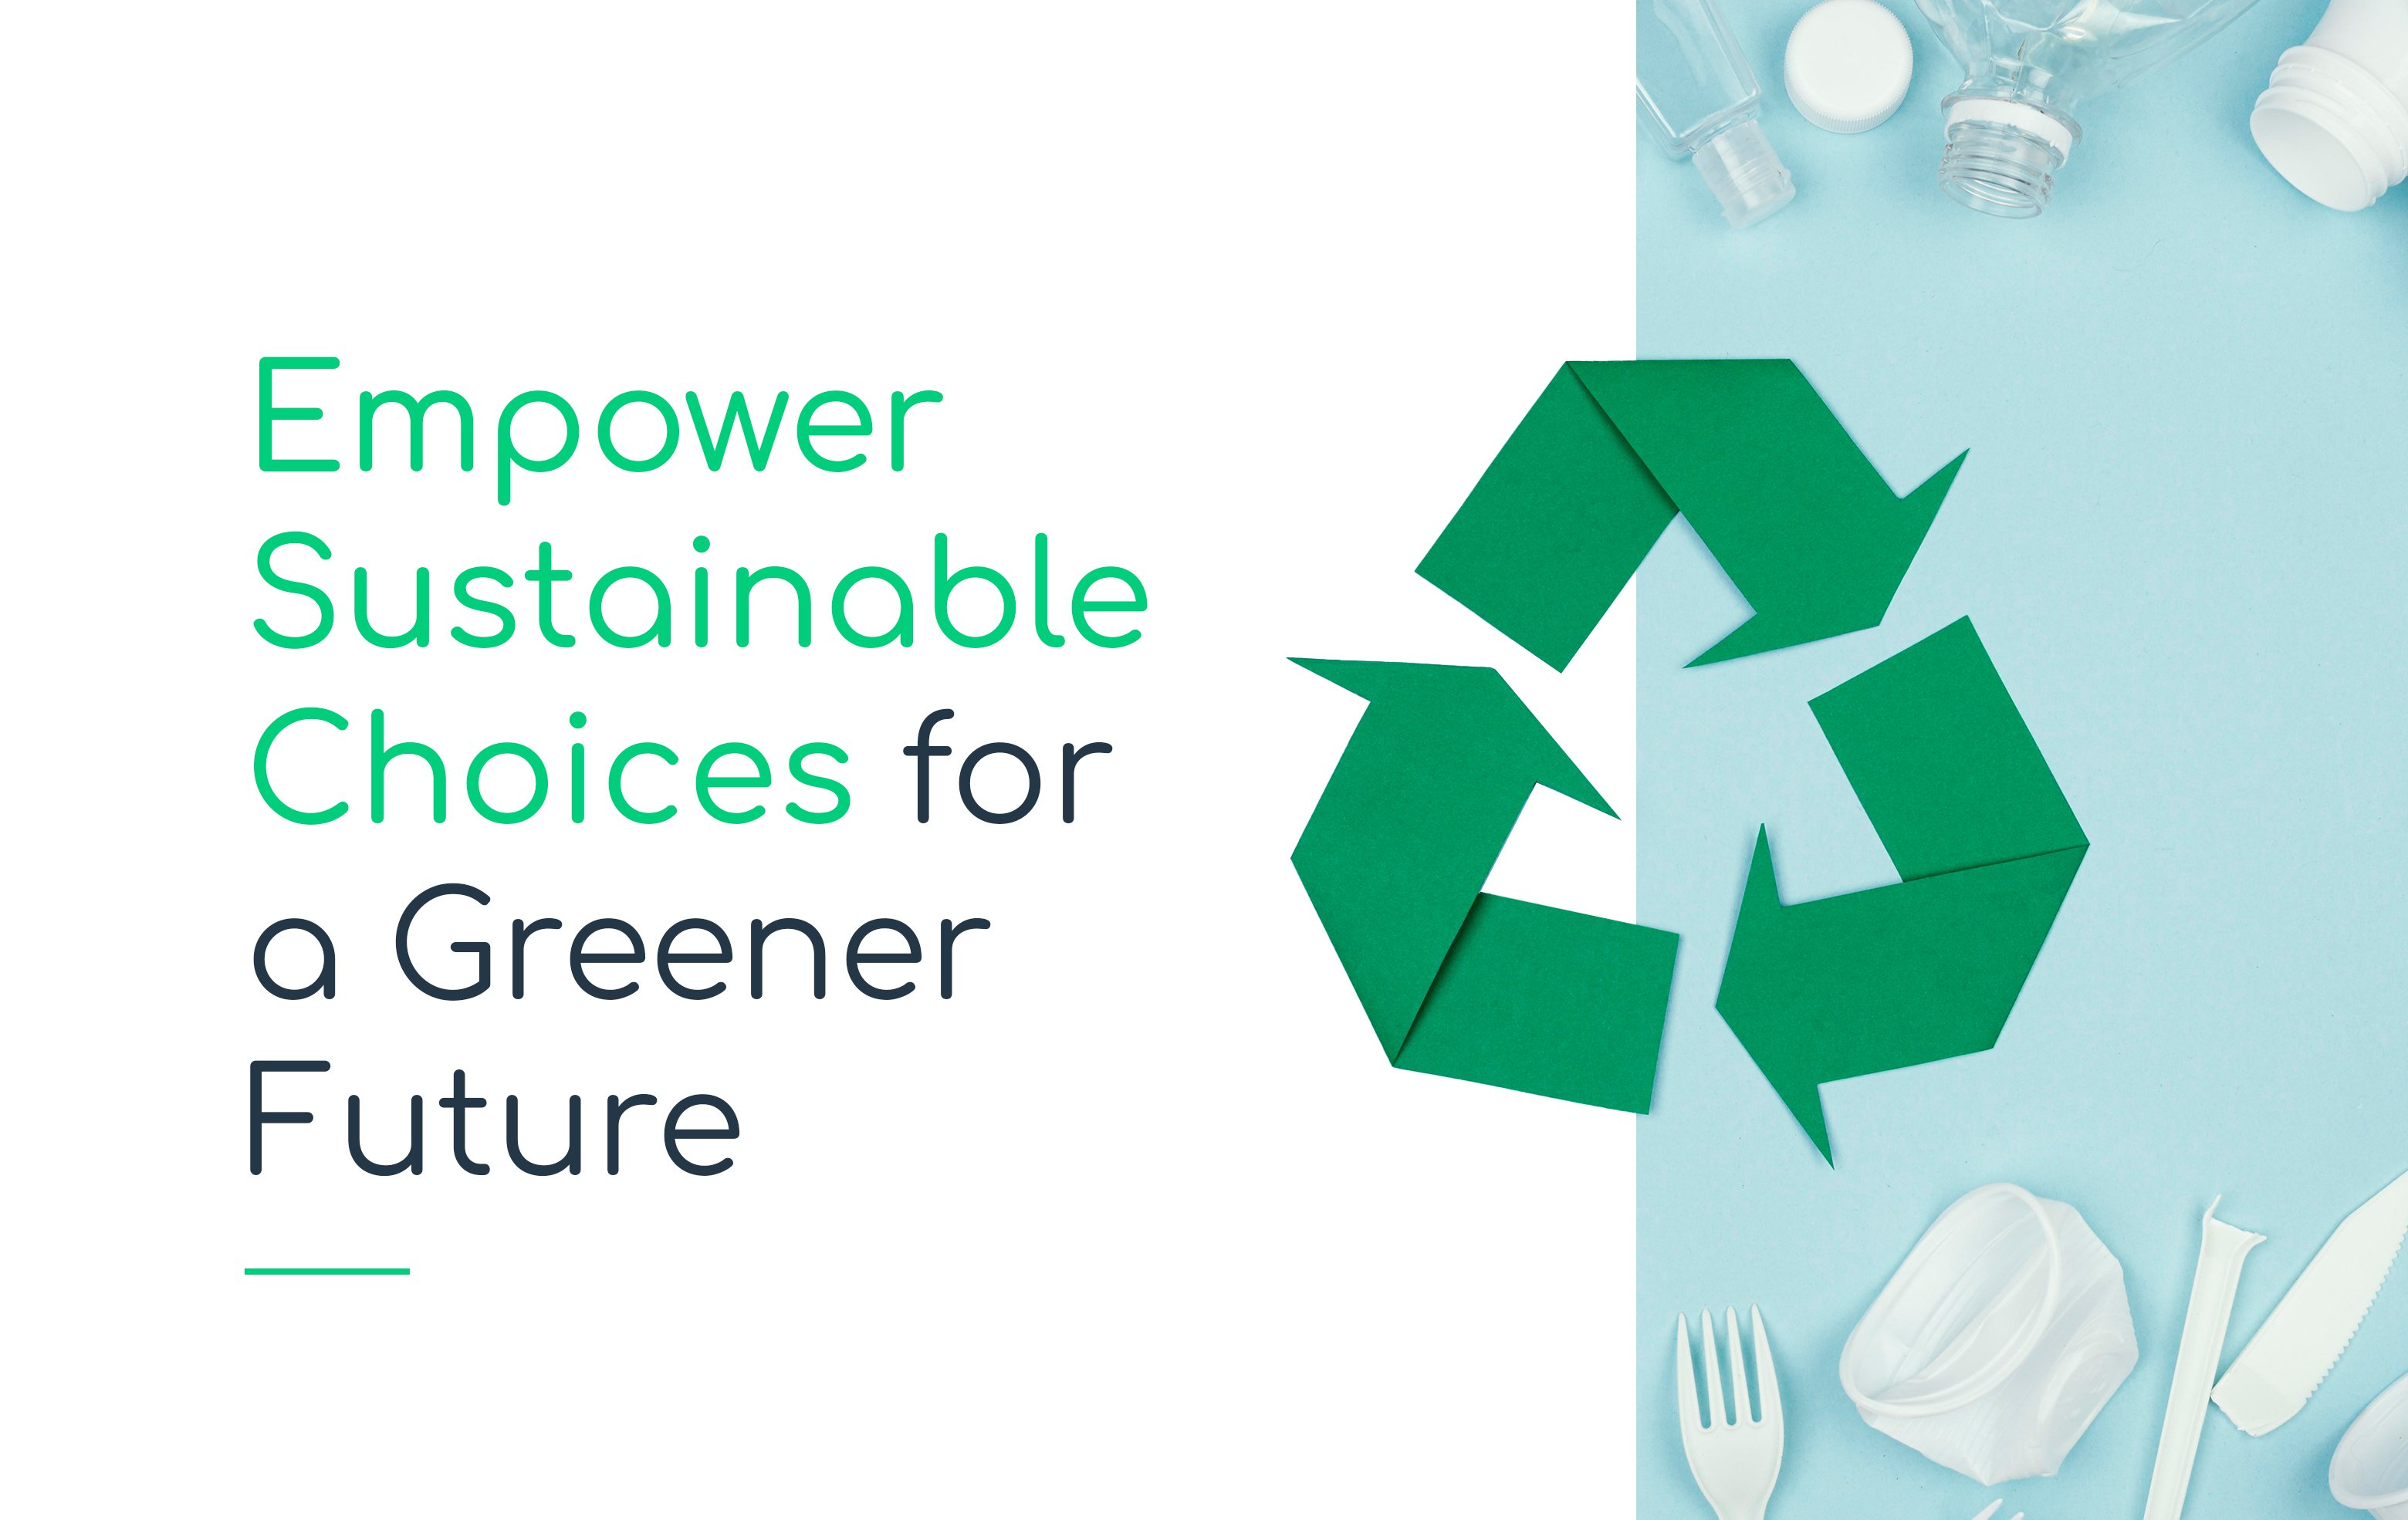 Empower Sustainable Choices for a Greener Future